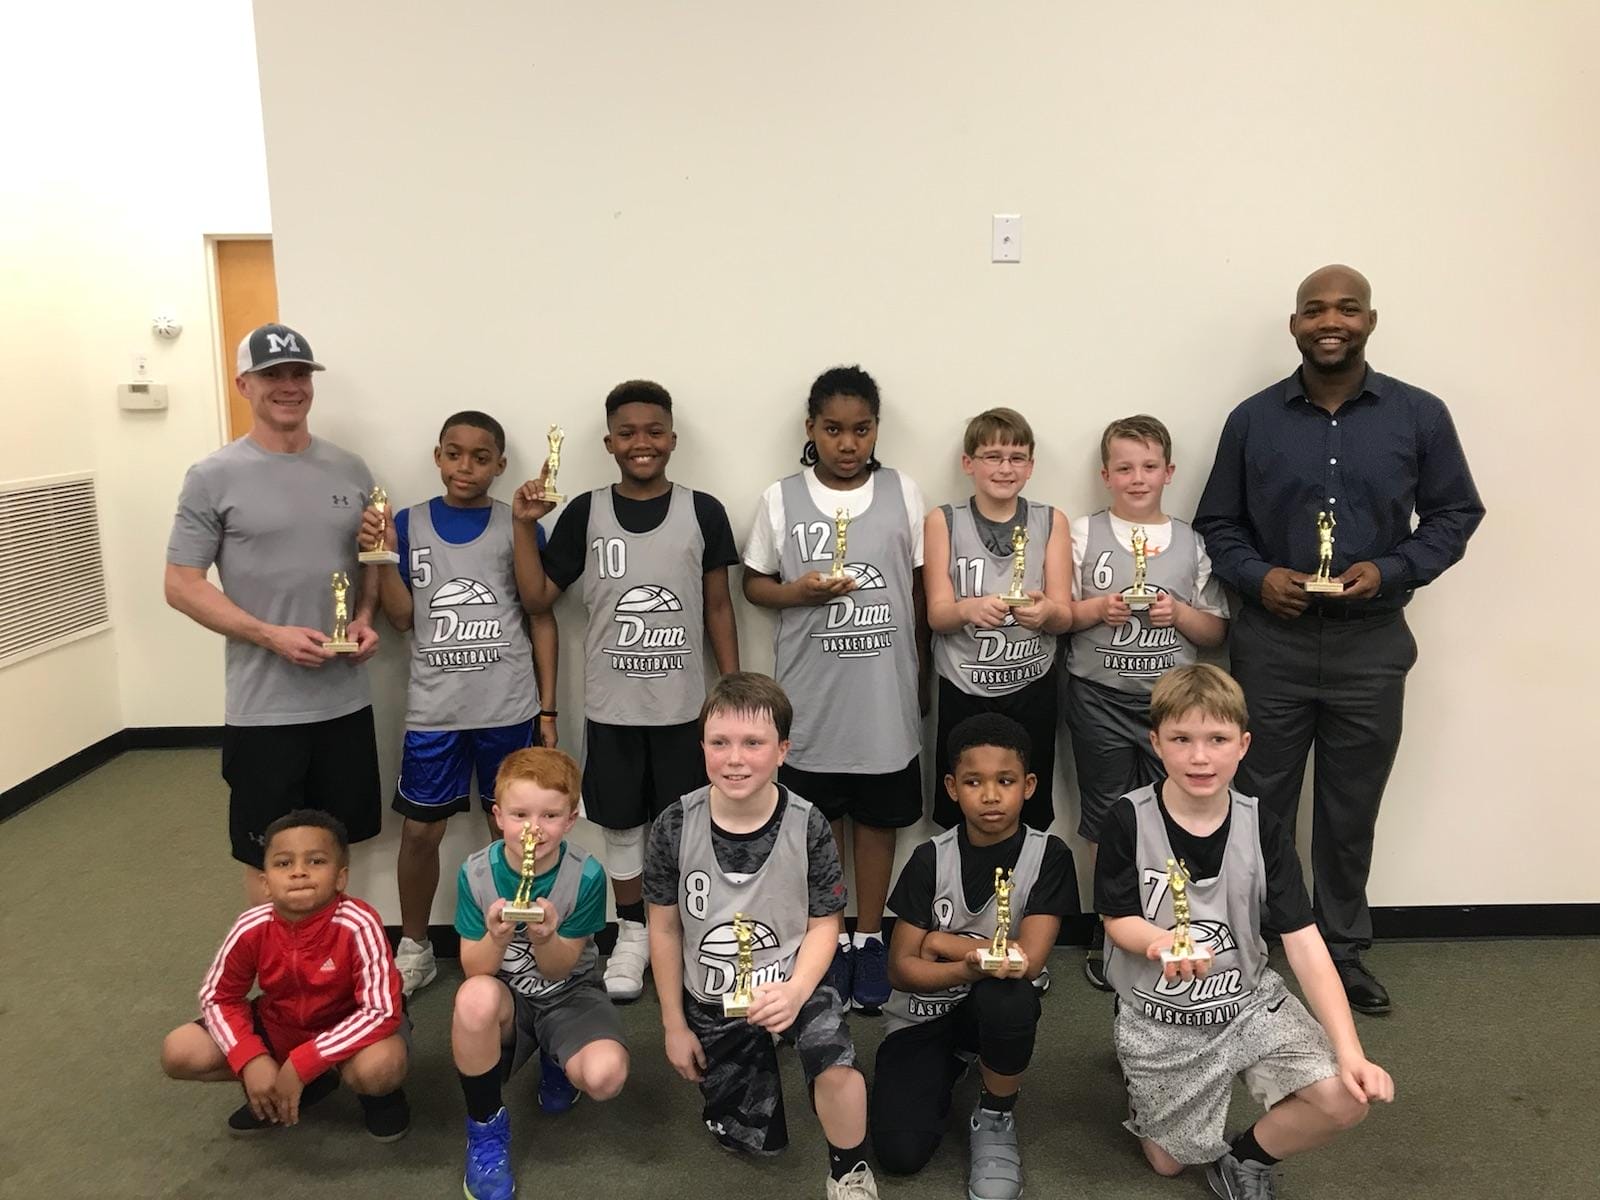 Dunn youth basketball tournaments completed